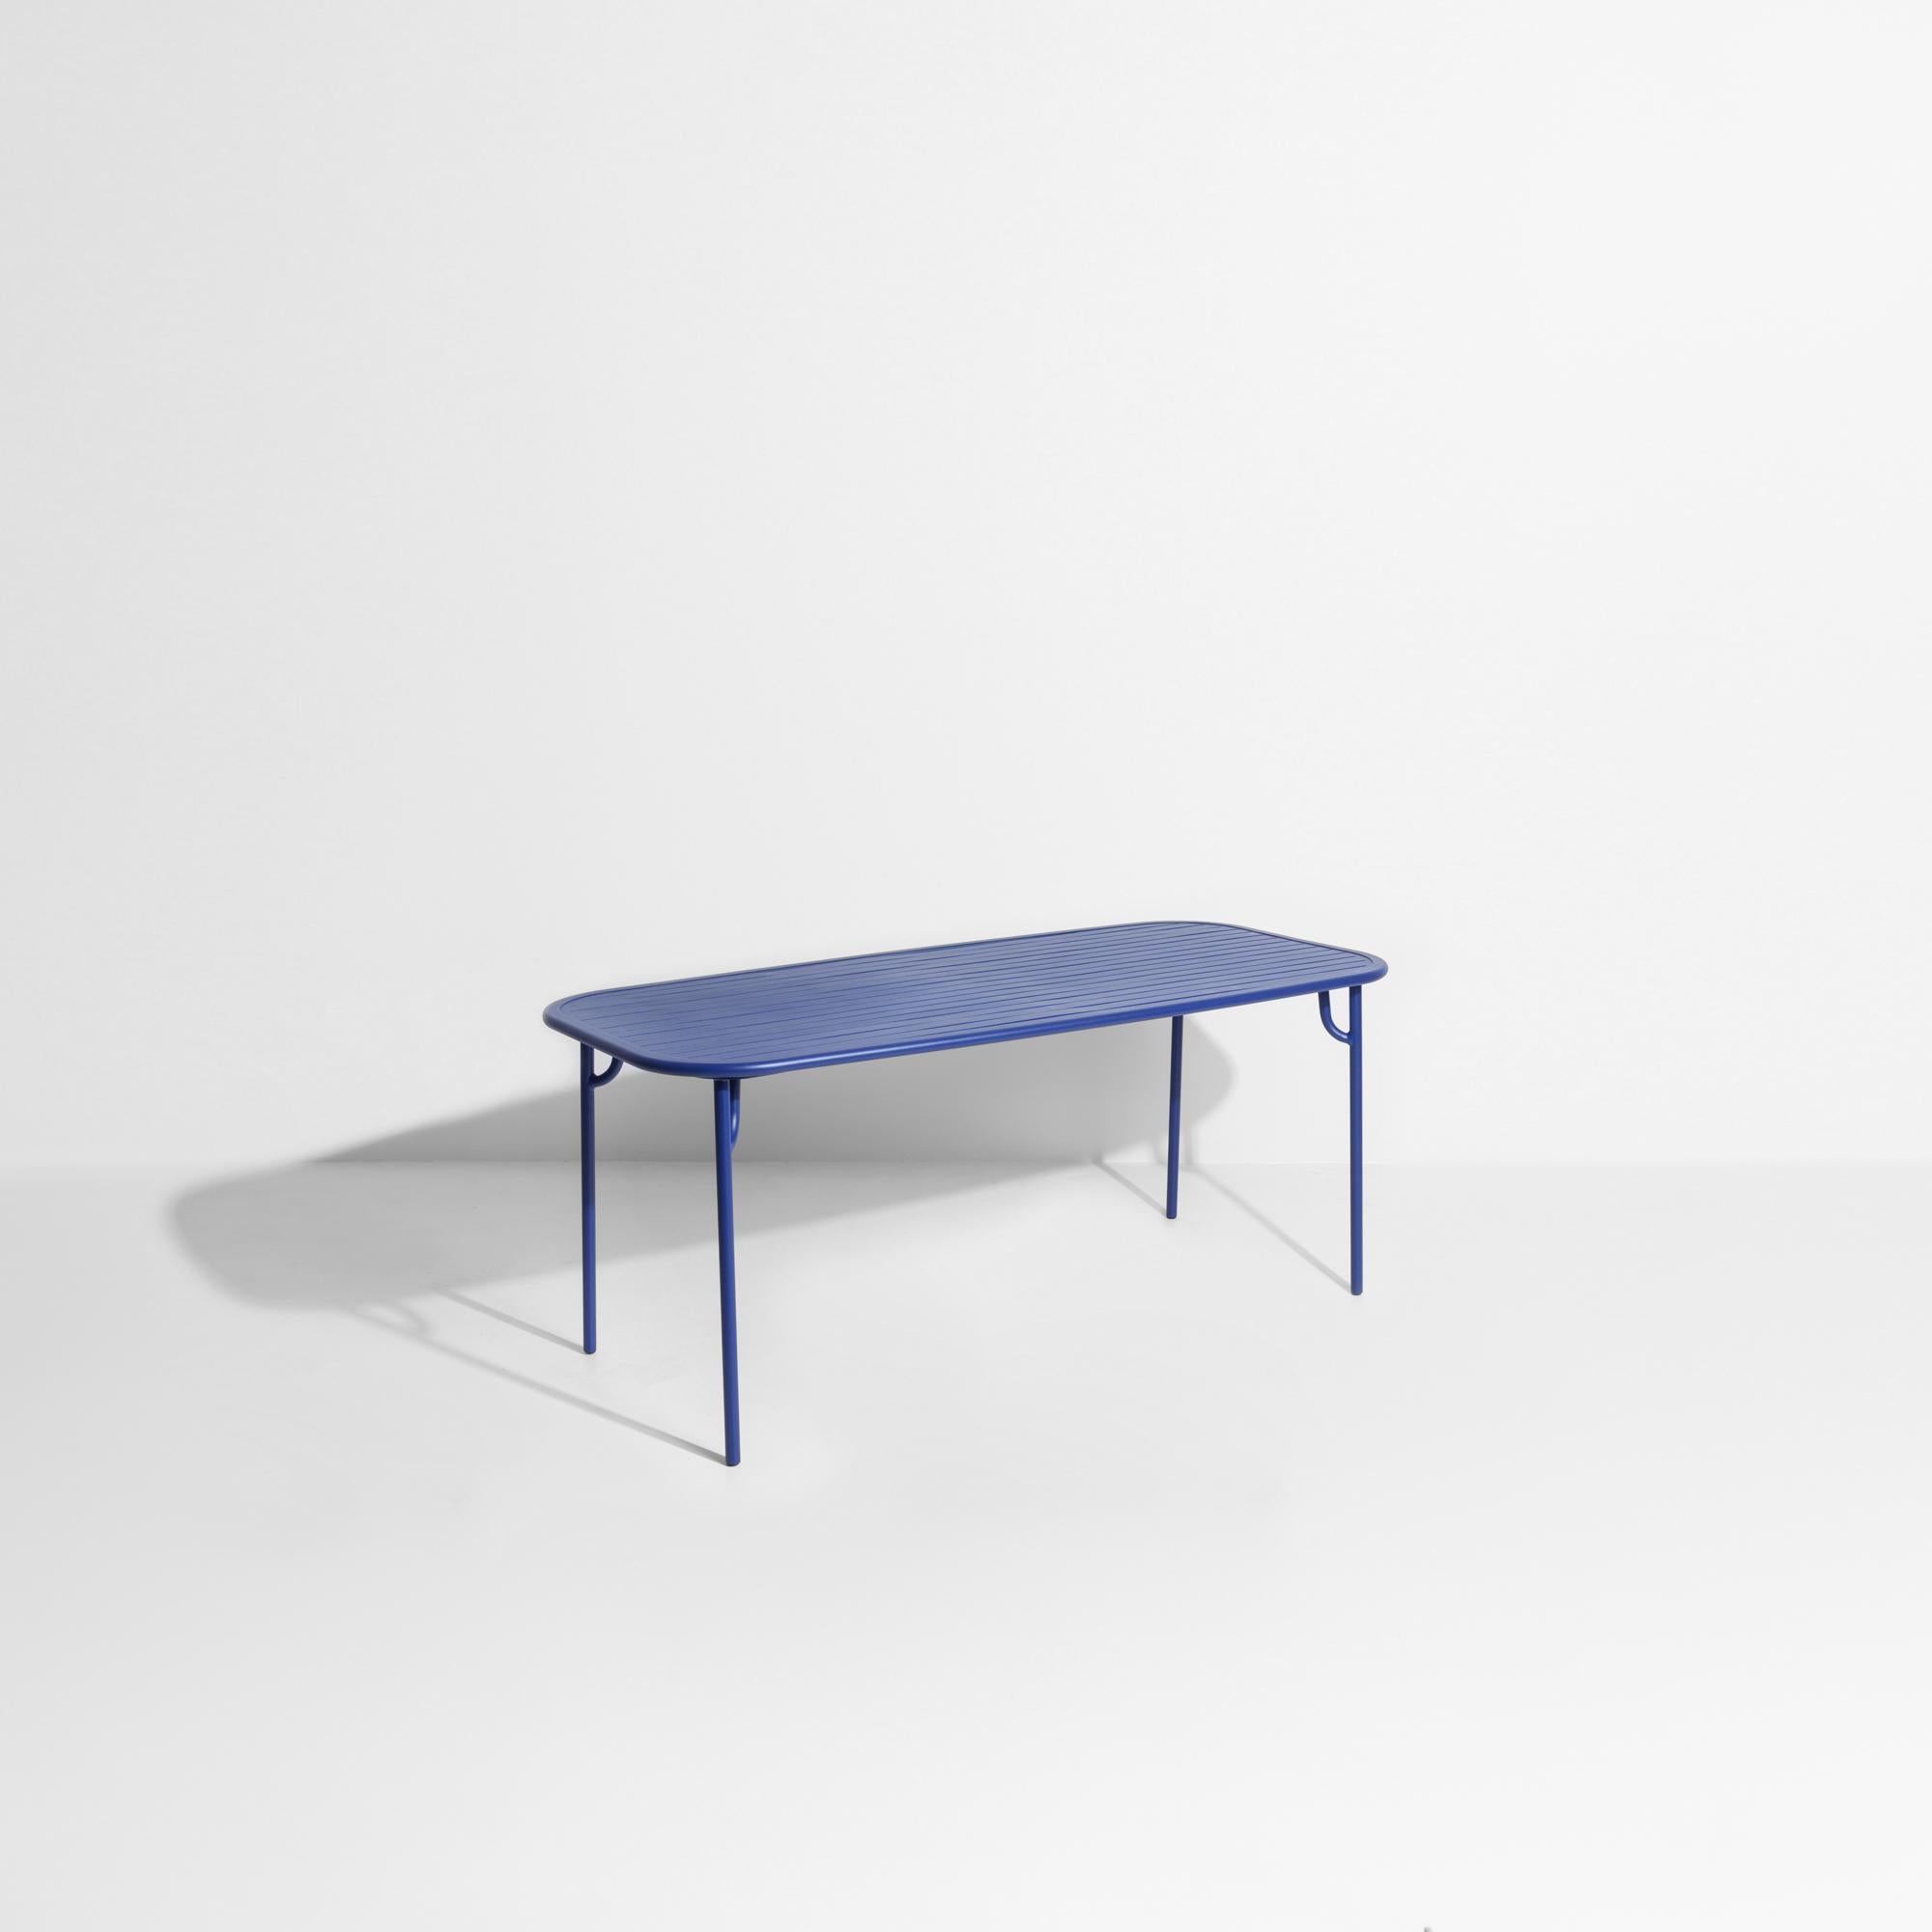 Contemporary Petite Friture Week-End Medium Rectangular Dining Table in Blue with Slats For Sale